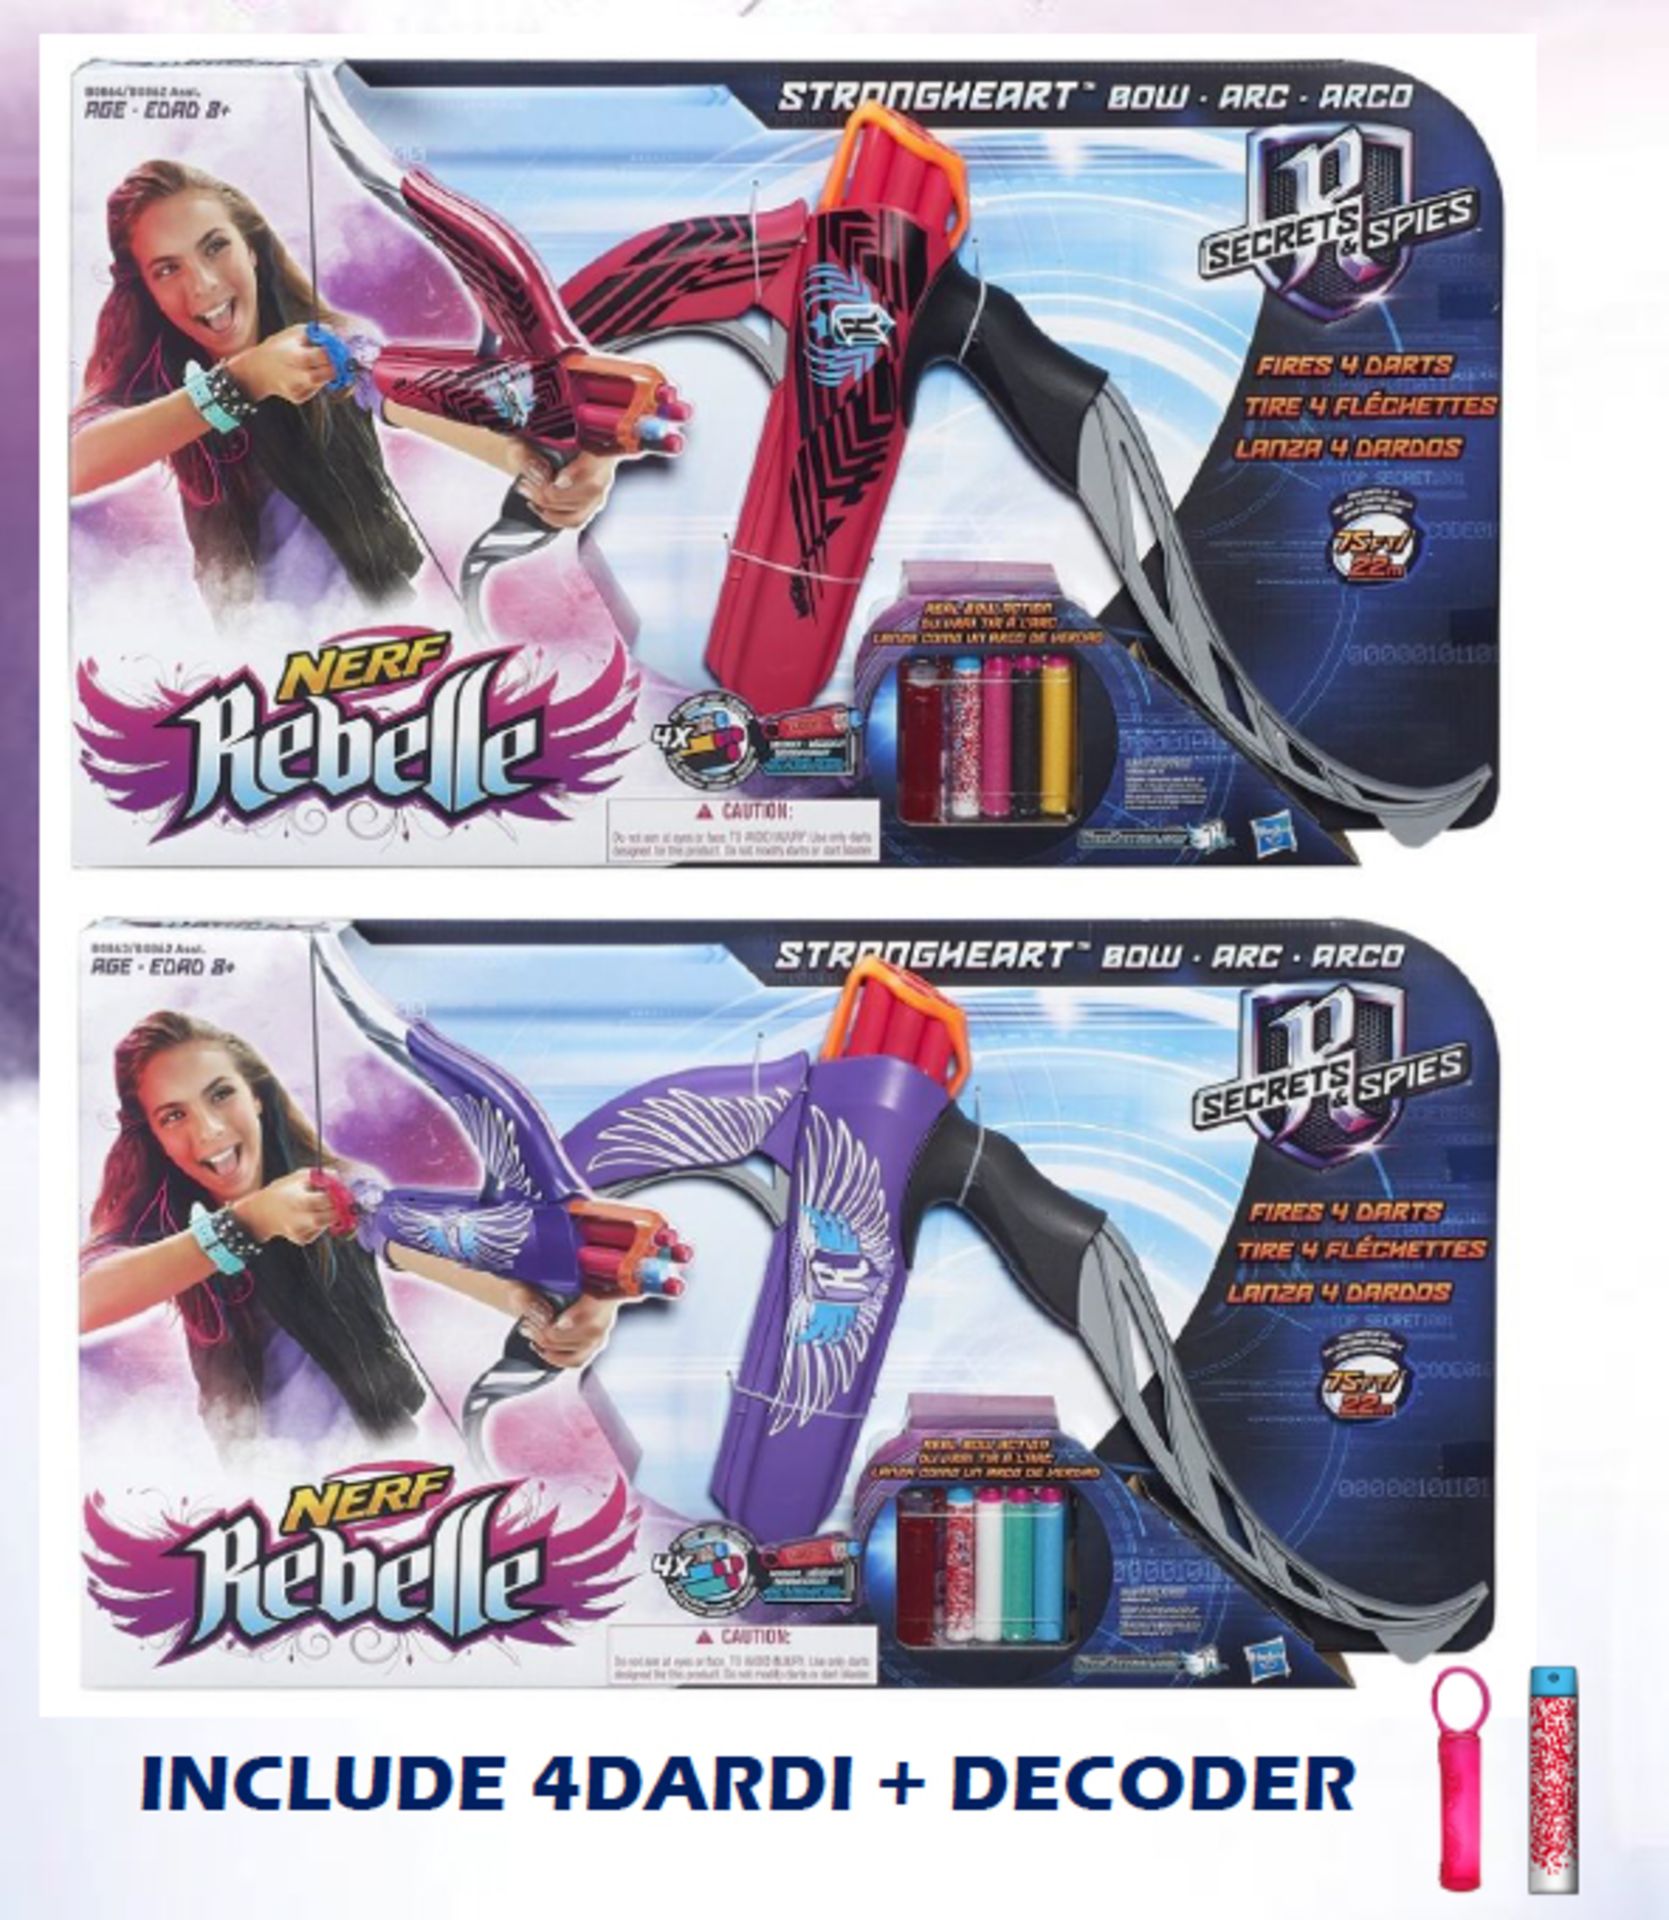 V Brand New Nerf Rebelle Secrets and Spies Strongheart Bow X 2 YOUR BID PRICE TO BE MULTIPLIED BY